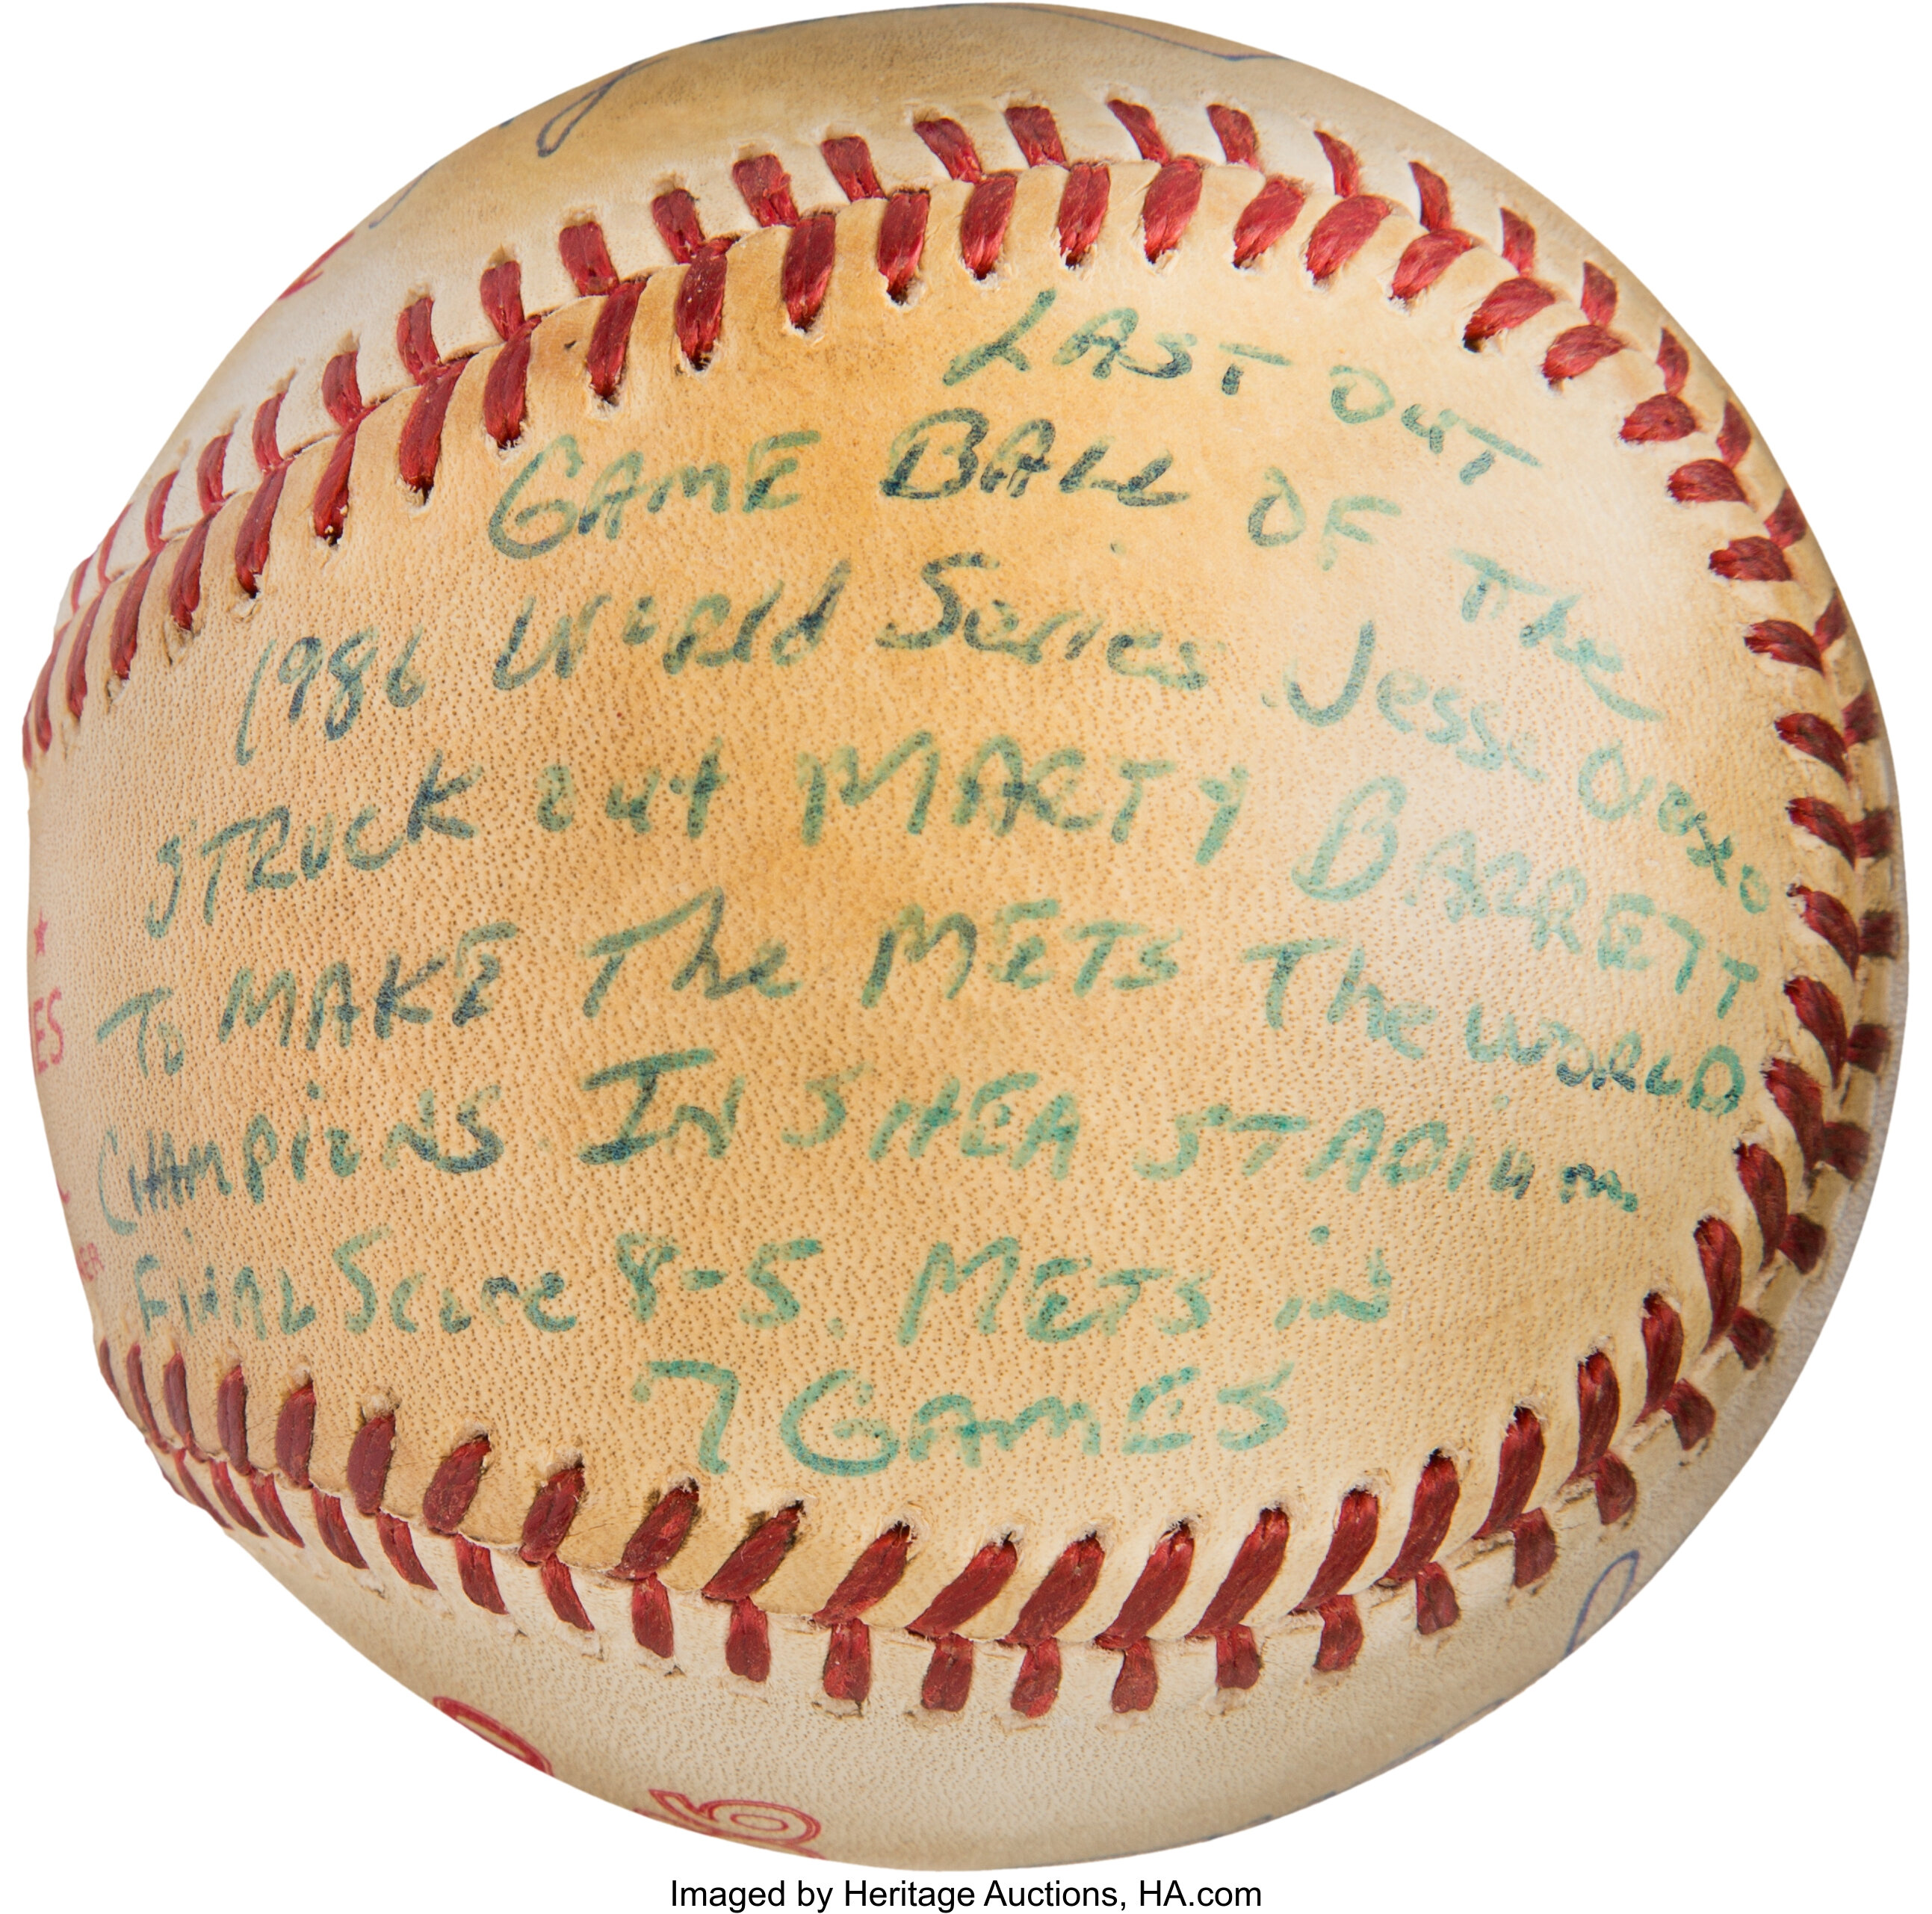 1986 World Series Last Out Baseball from The Gary Carter